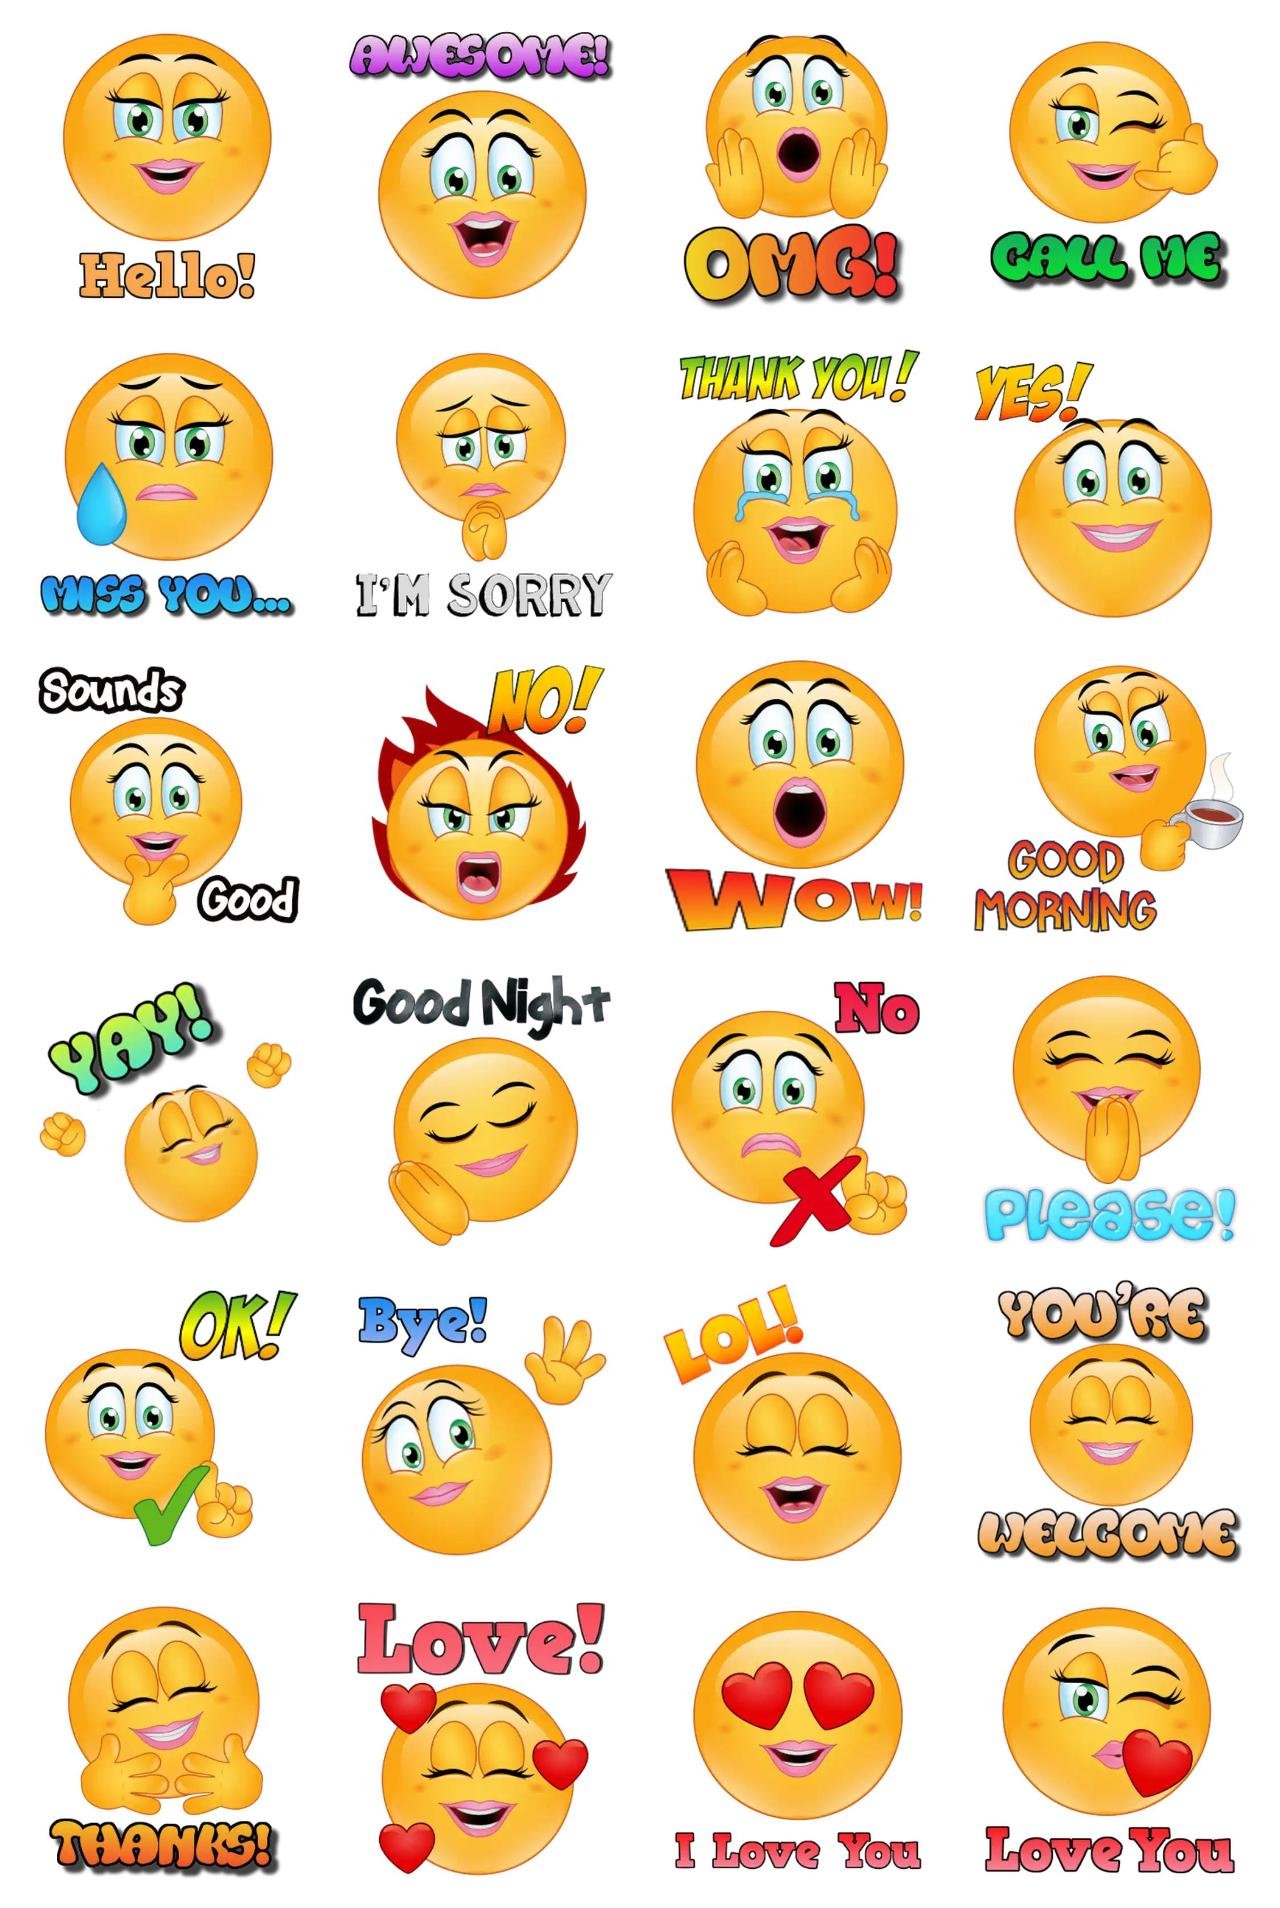 Emoji World Sticker People,Phrases sticker pack for Whatsapp, Telegram, Signal, and others chatting and message apps